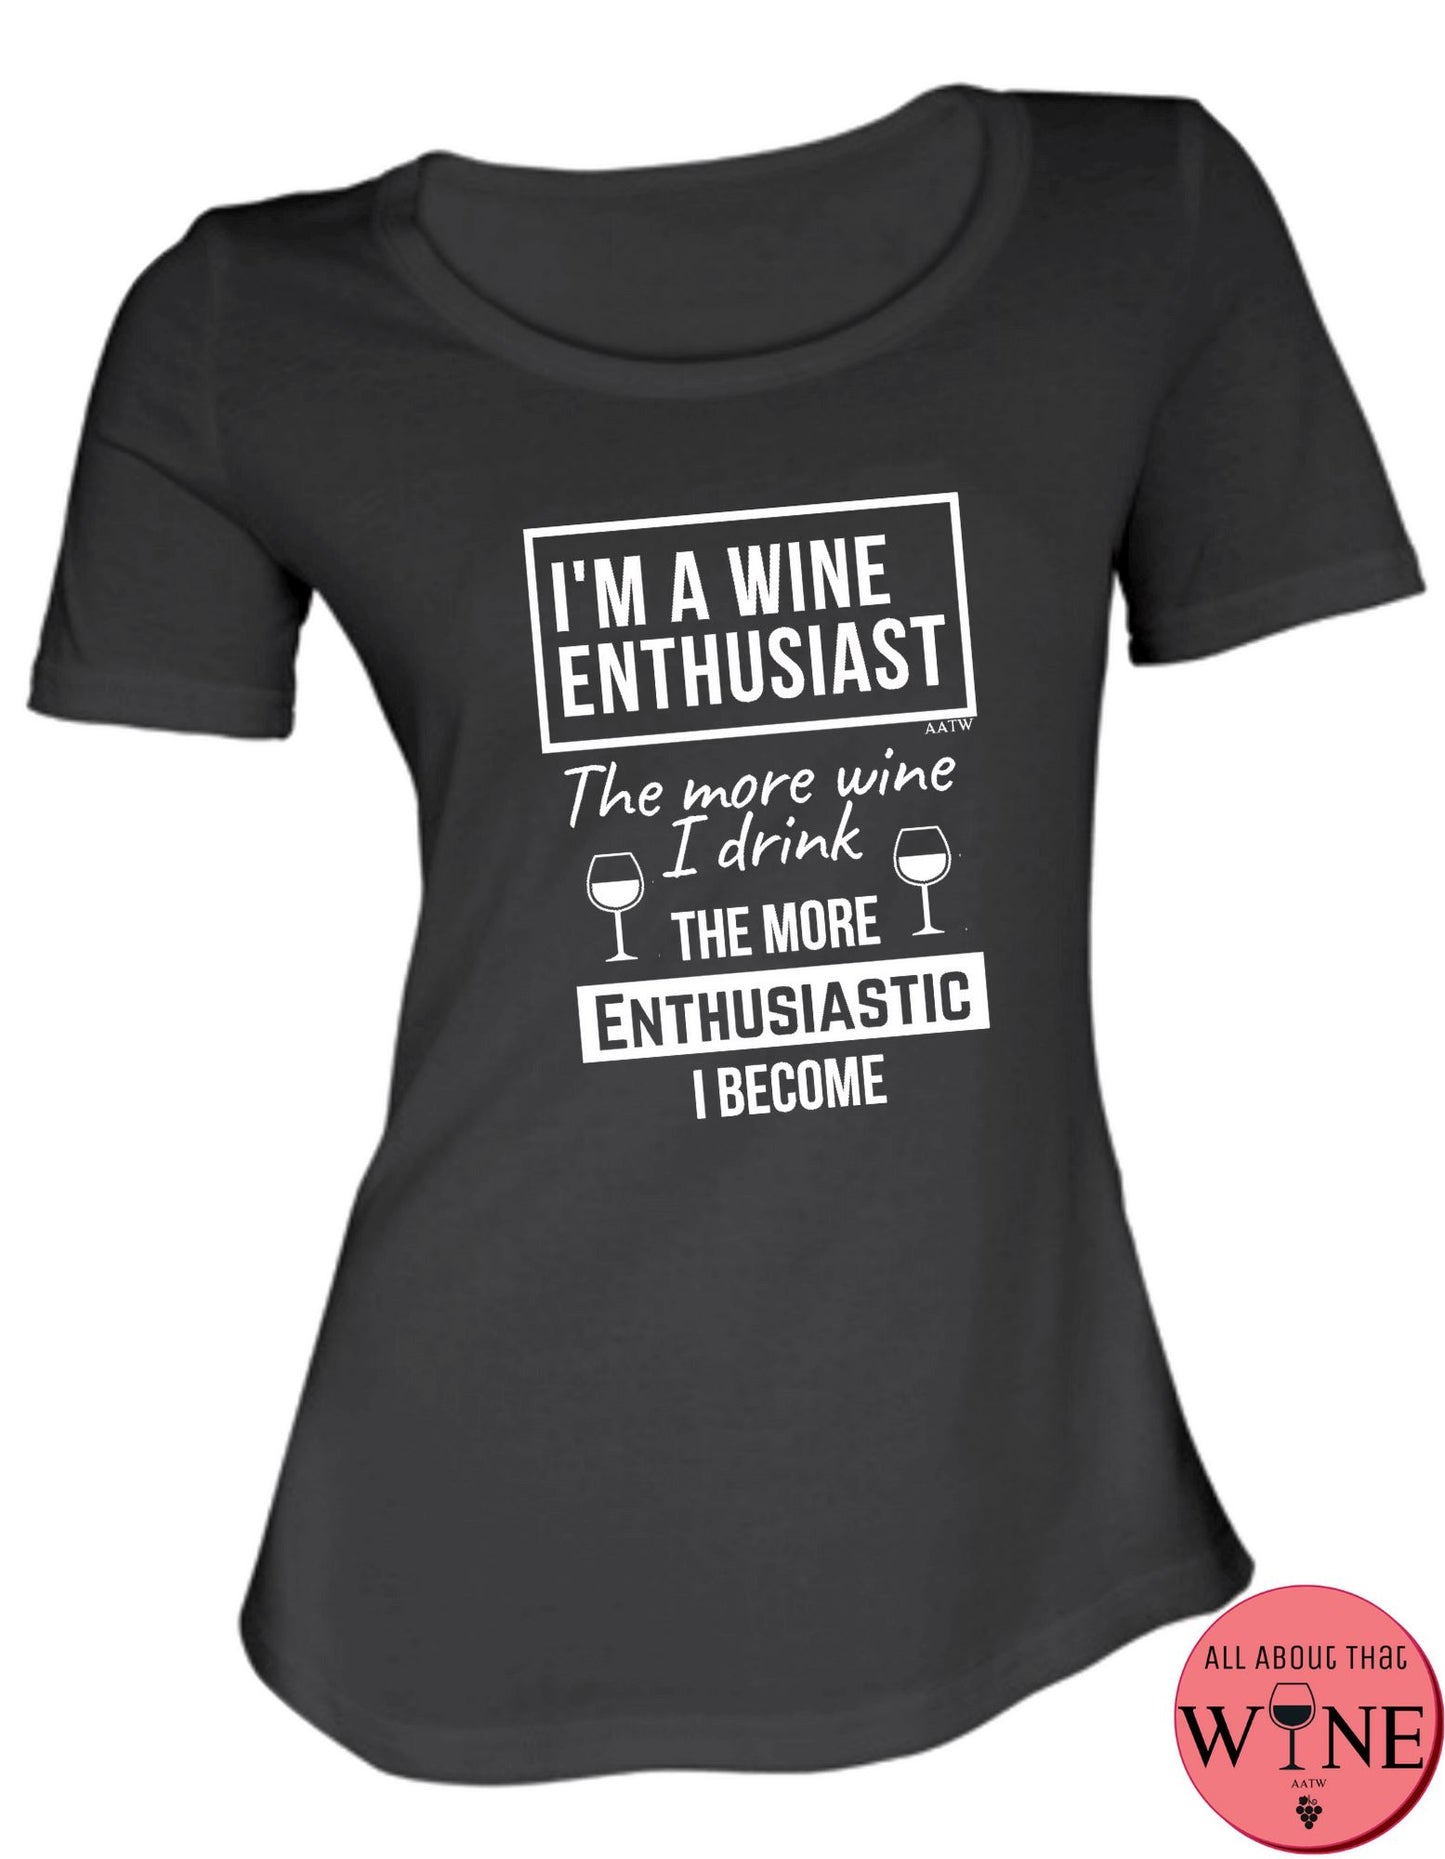 I'm A Wine Enthusiast S Black with white